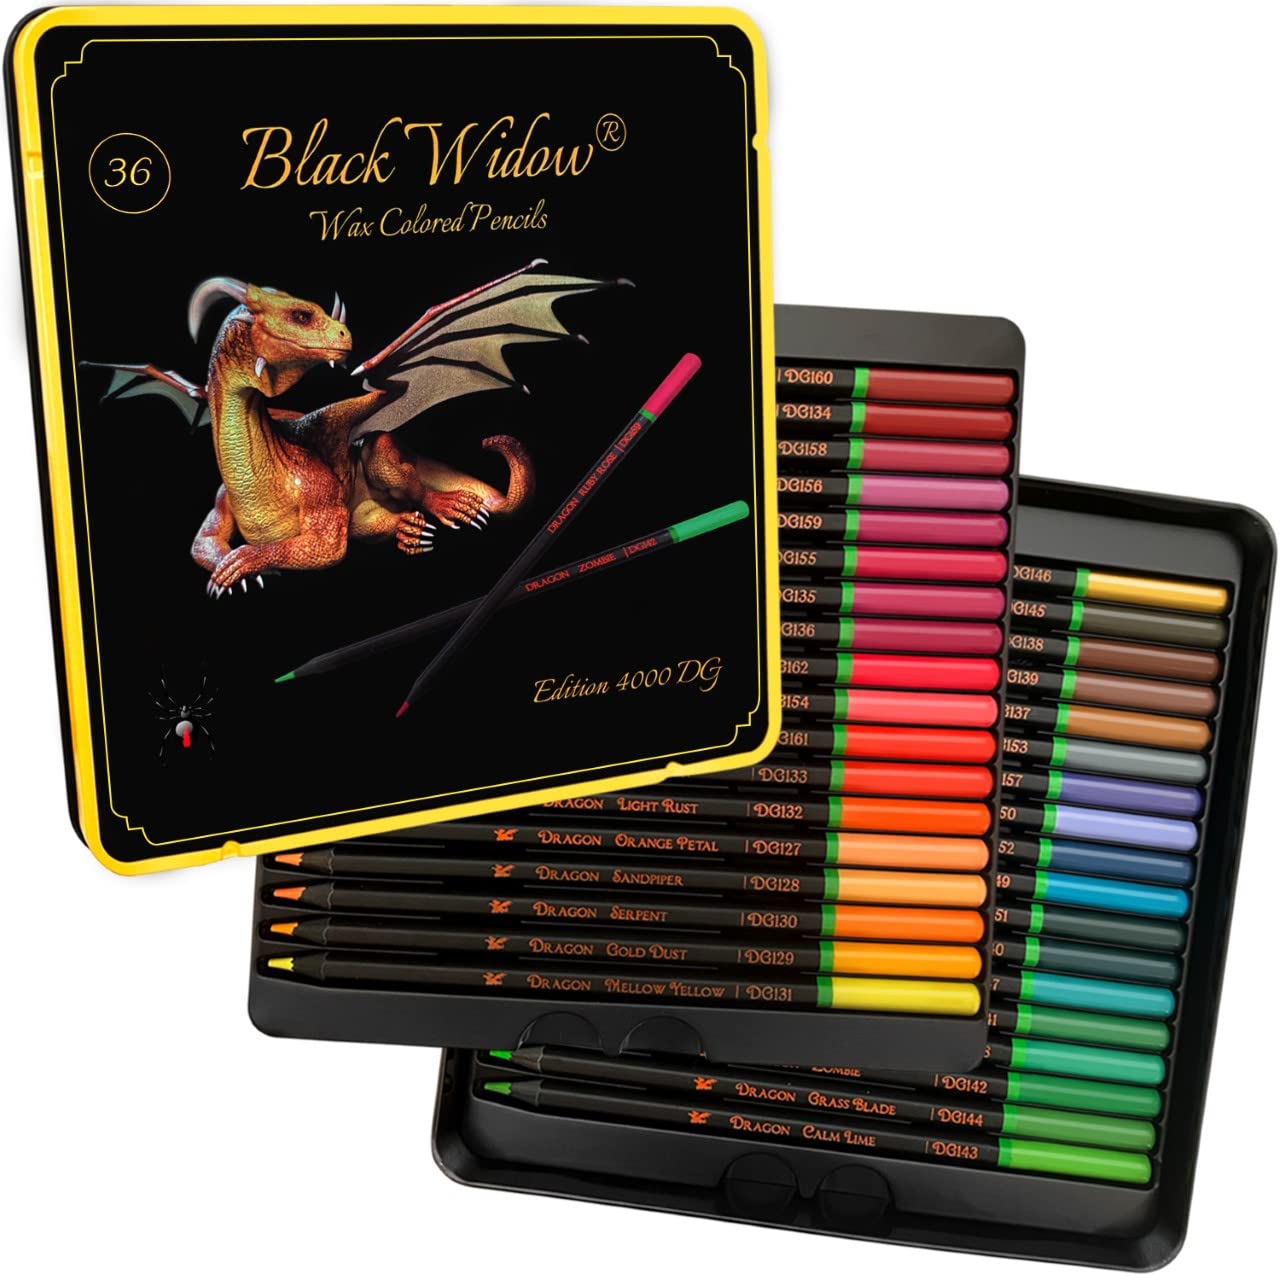 Black Widow Dragon Colored Pencils For Adult Coloring - 36